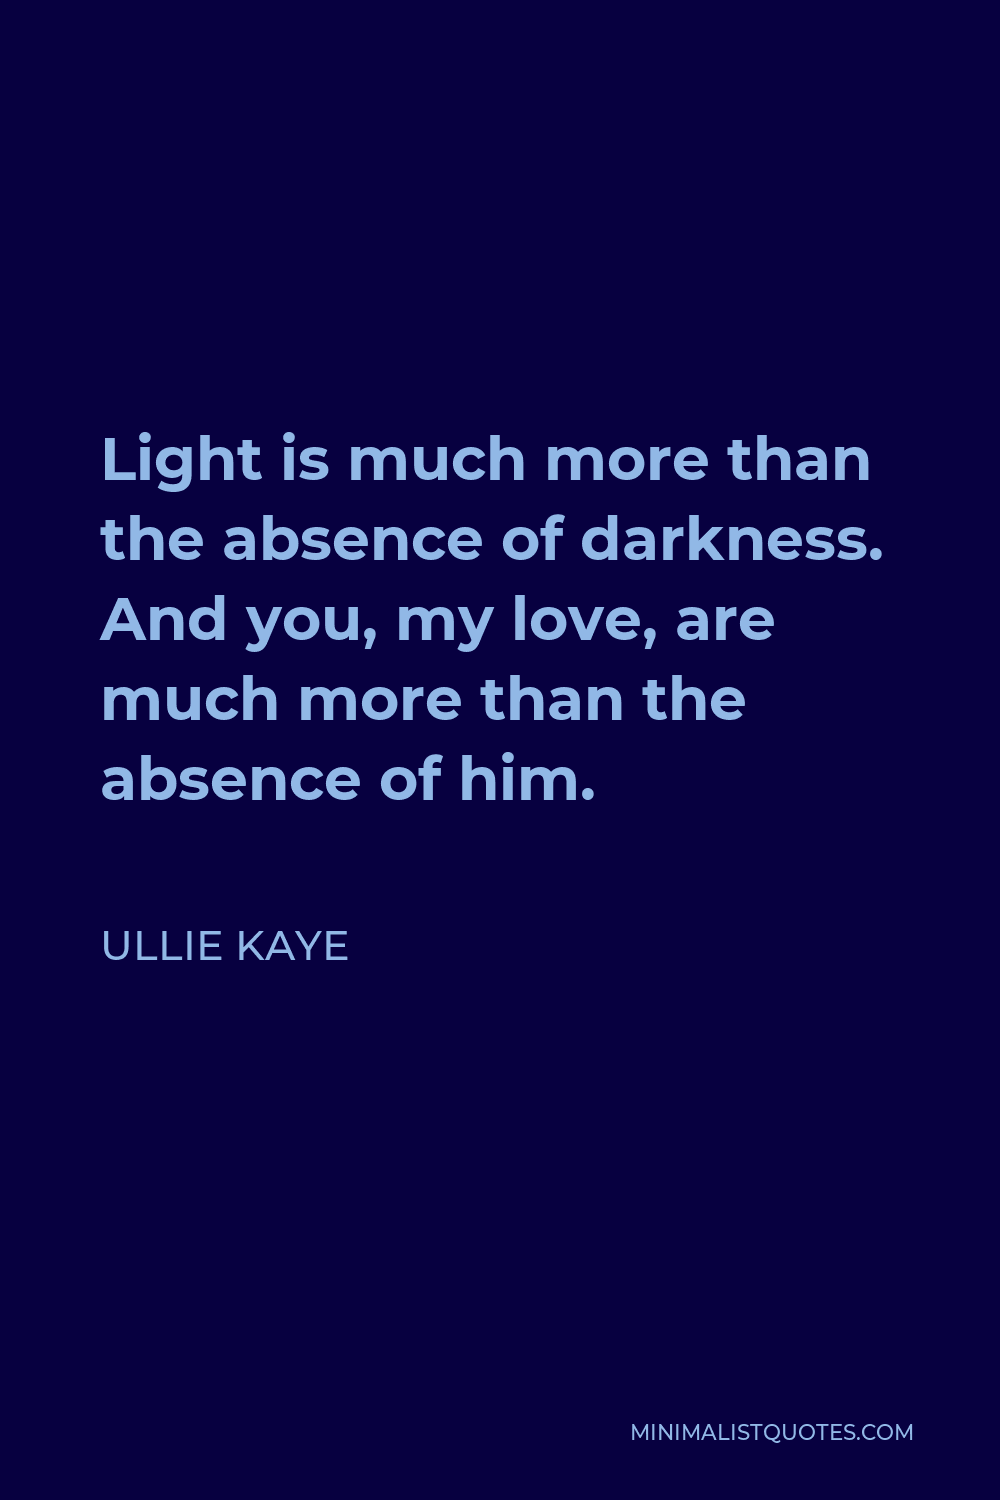 Ullie Kaye Quote - Light is much more than the absence of darkness. And you, my love, are much more than the absence of him.